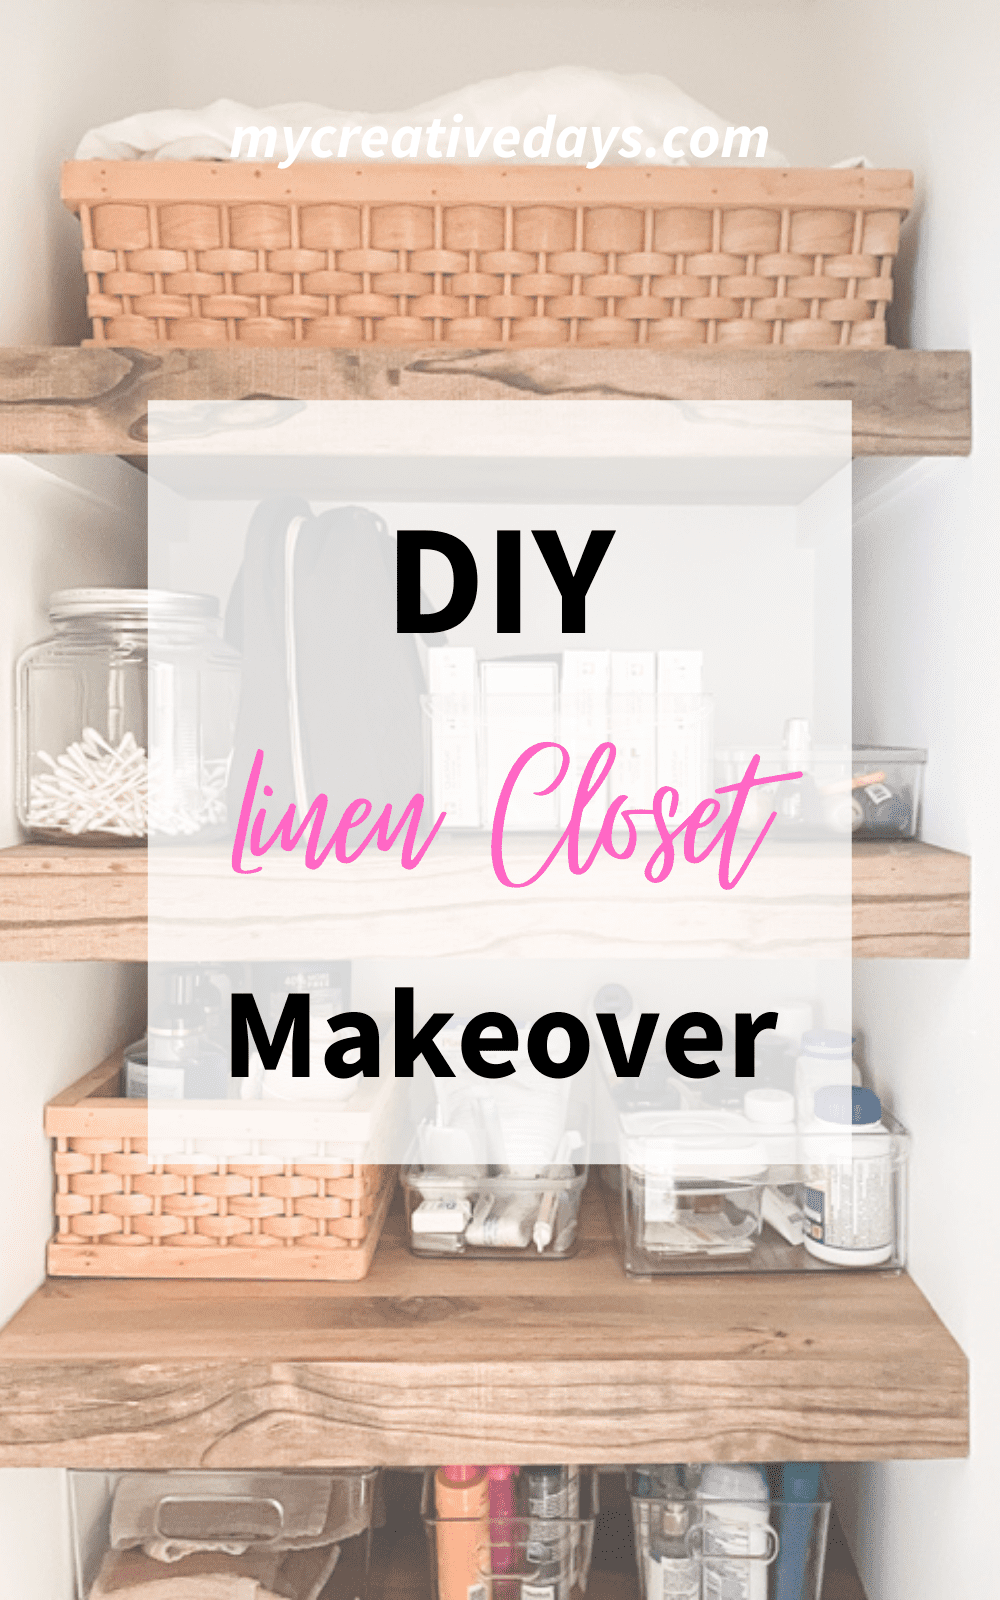 This DIY linen closet makeover was an easy and inexpensive project that not only made it look better but it functioned so much better too.